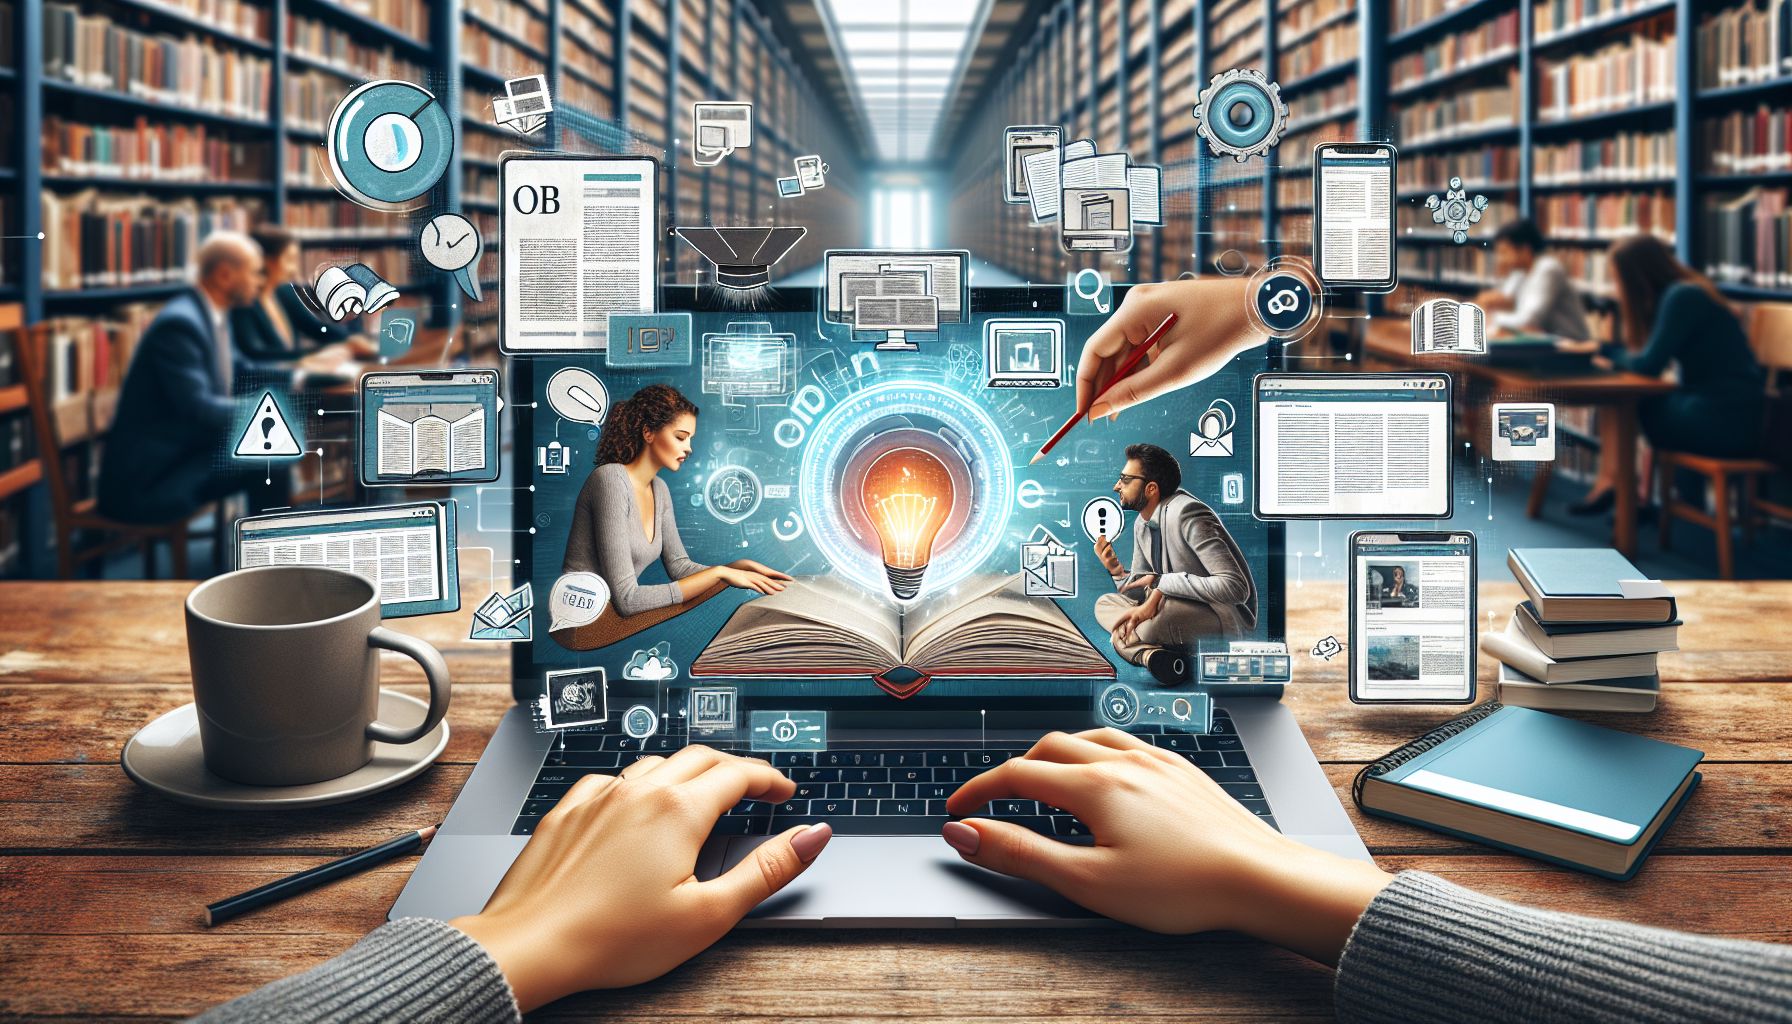 Exploring Open Educational Resources for University Students